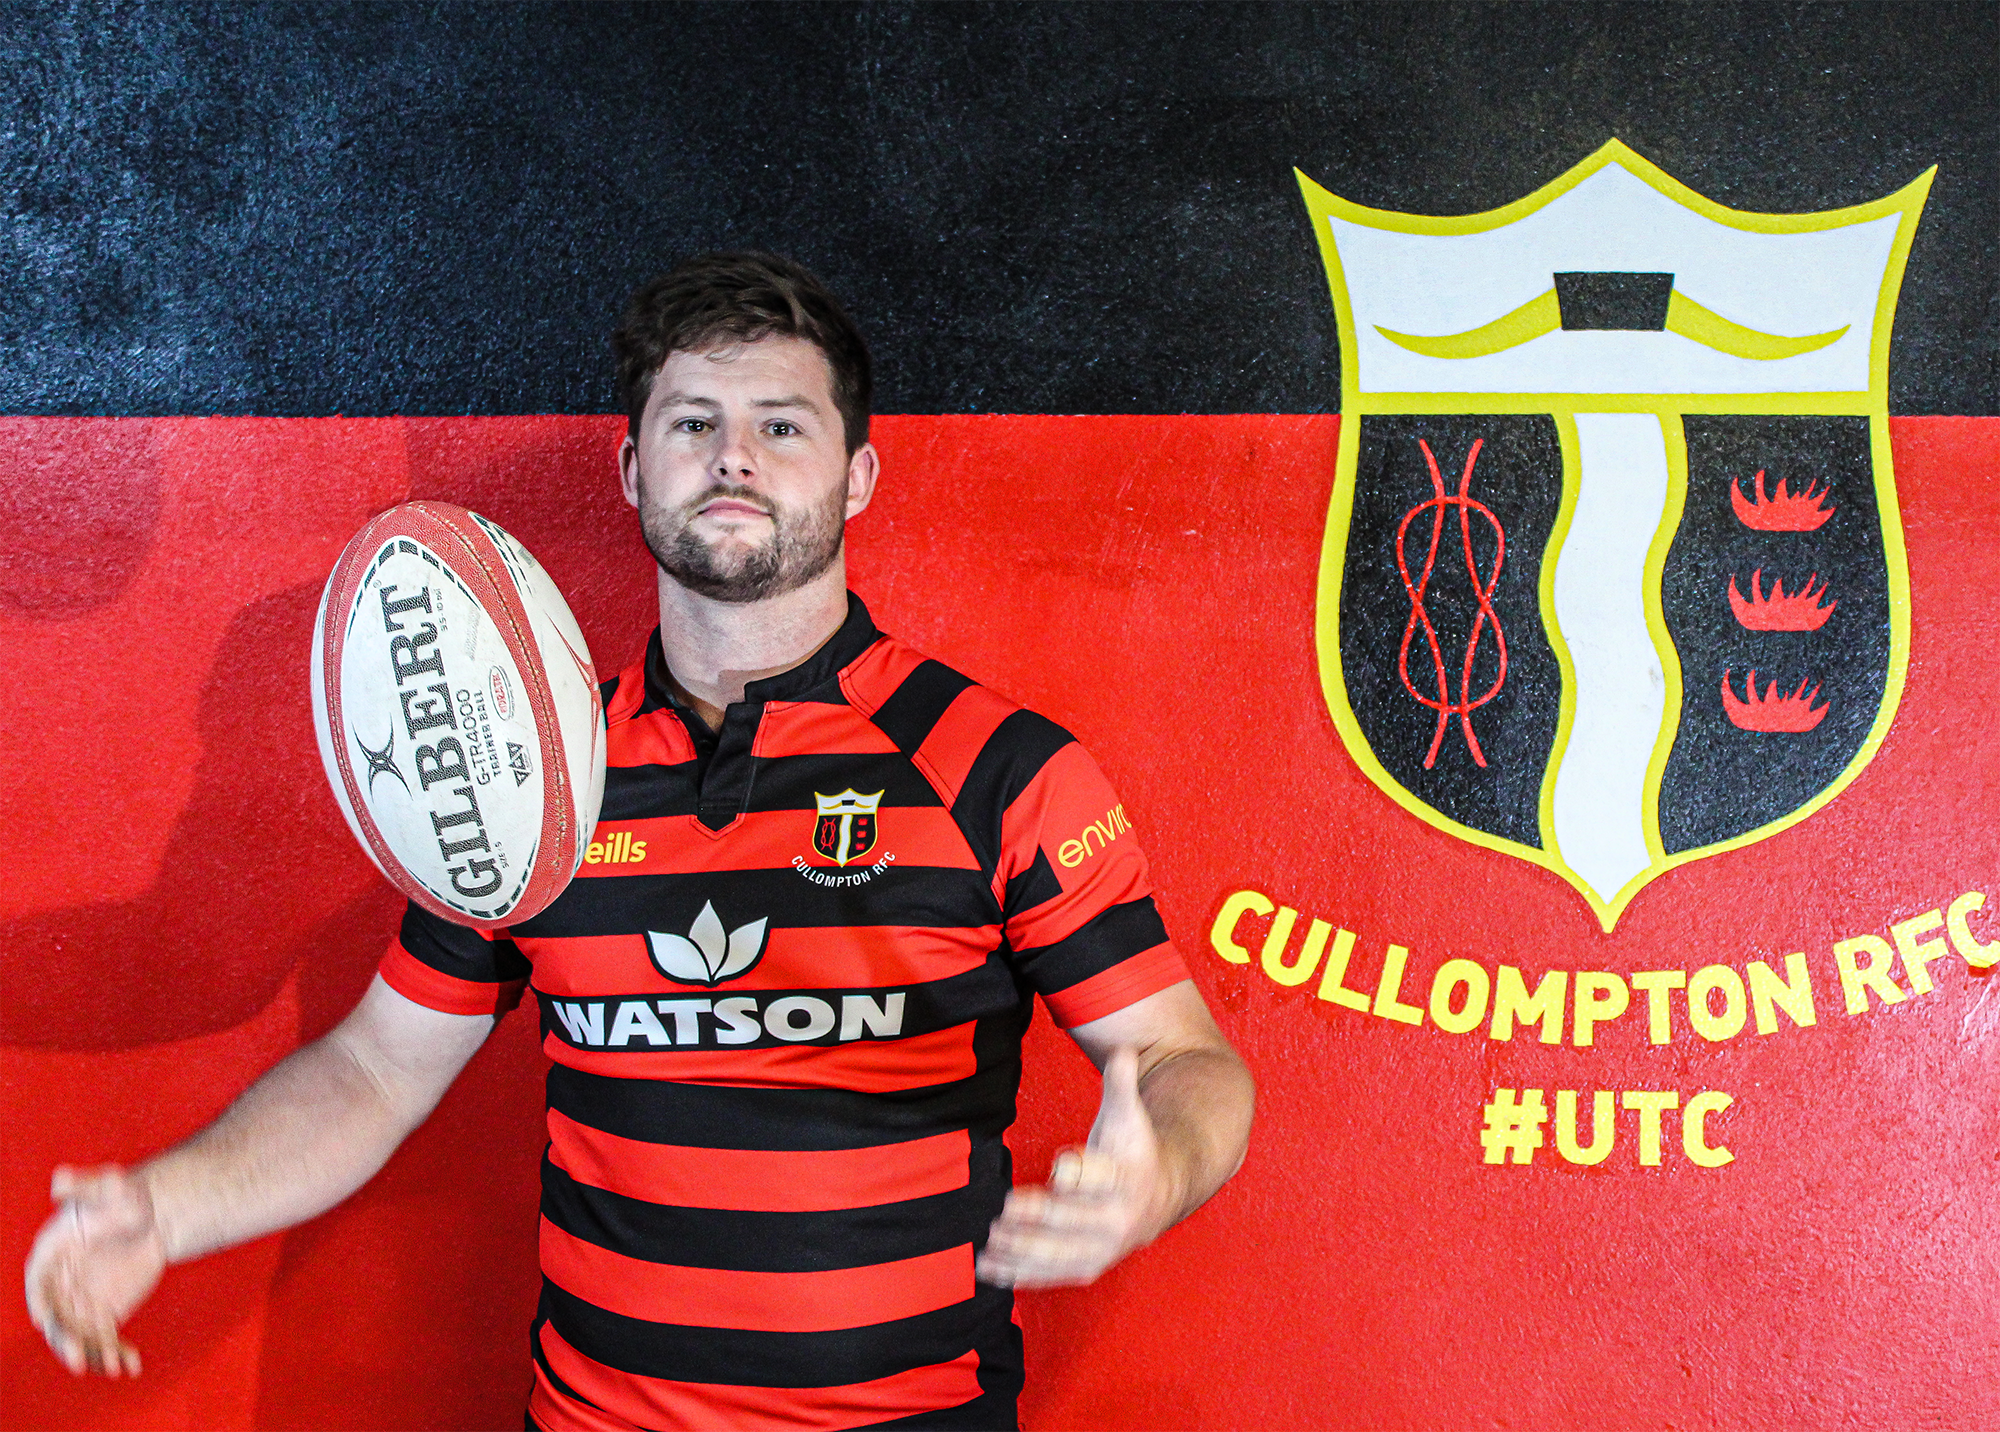 United Fixings Sponsors Cullompton Rugby Club for 2022-2023 Season: Kit Launch Video Revealed!